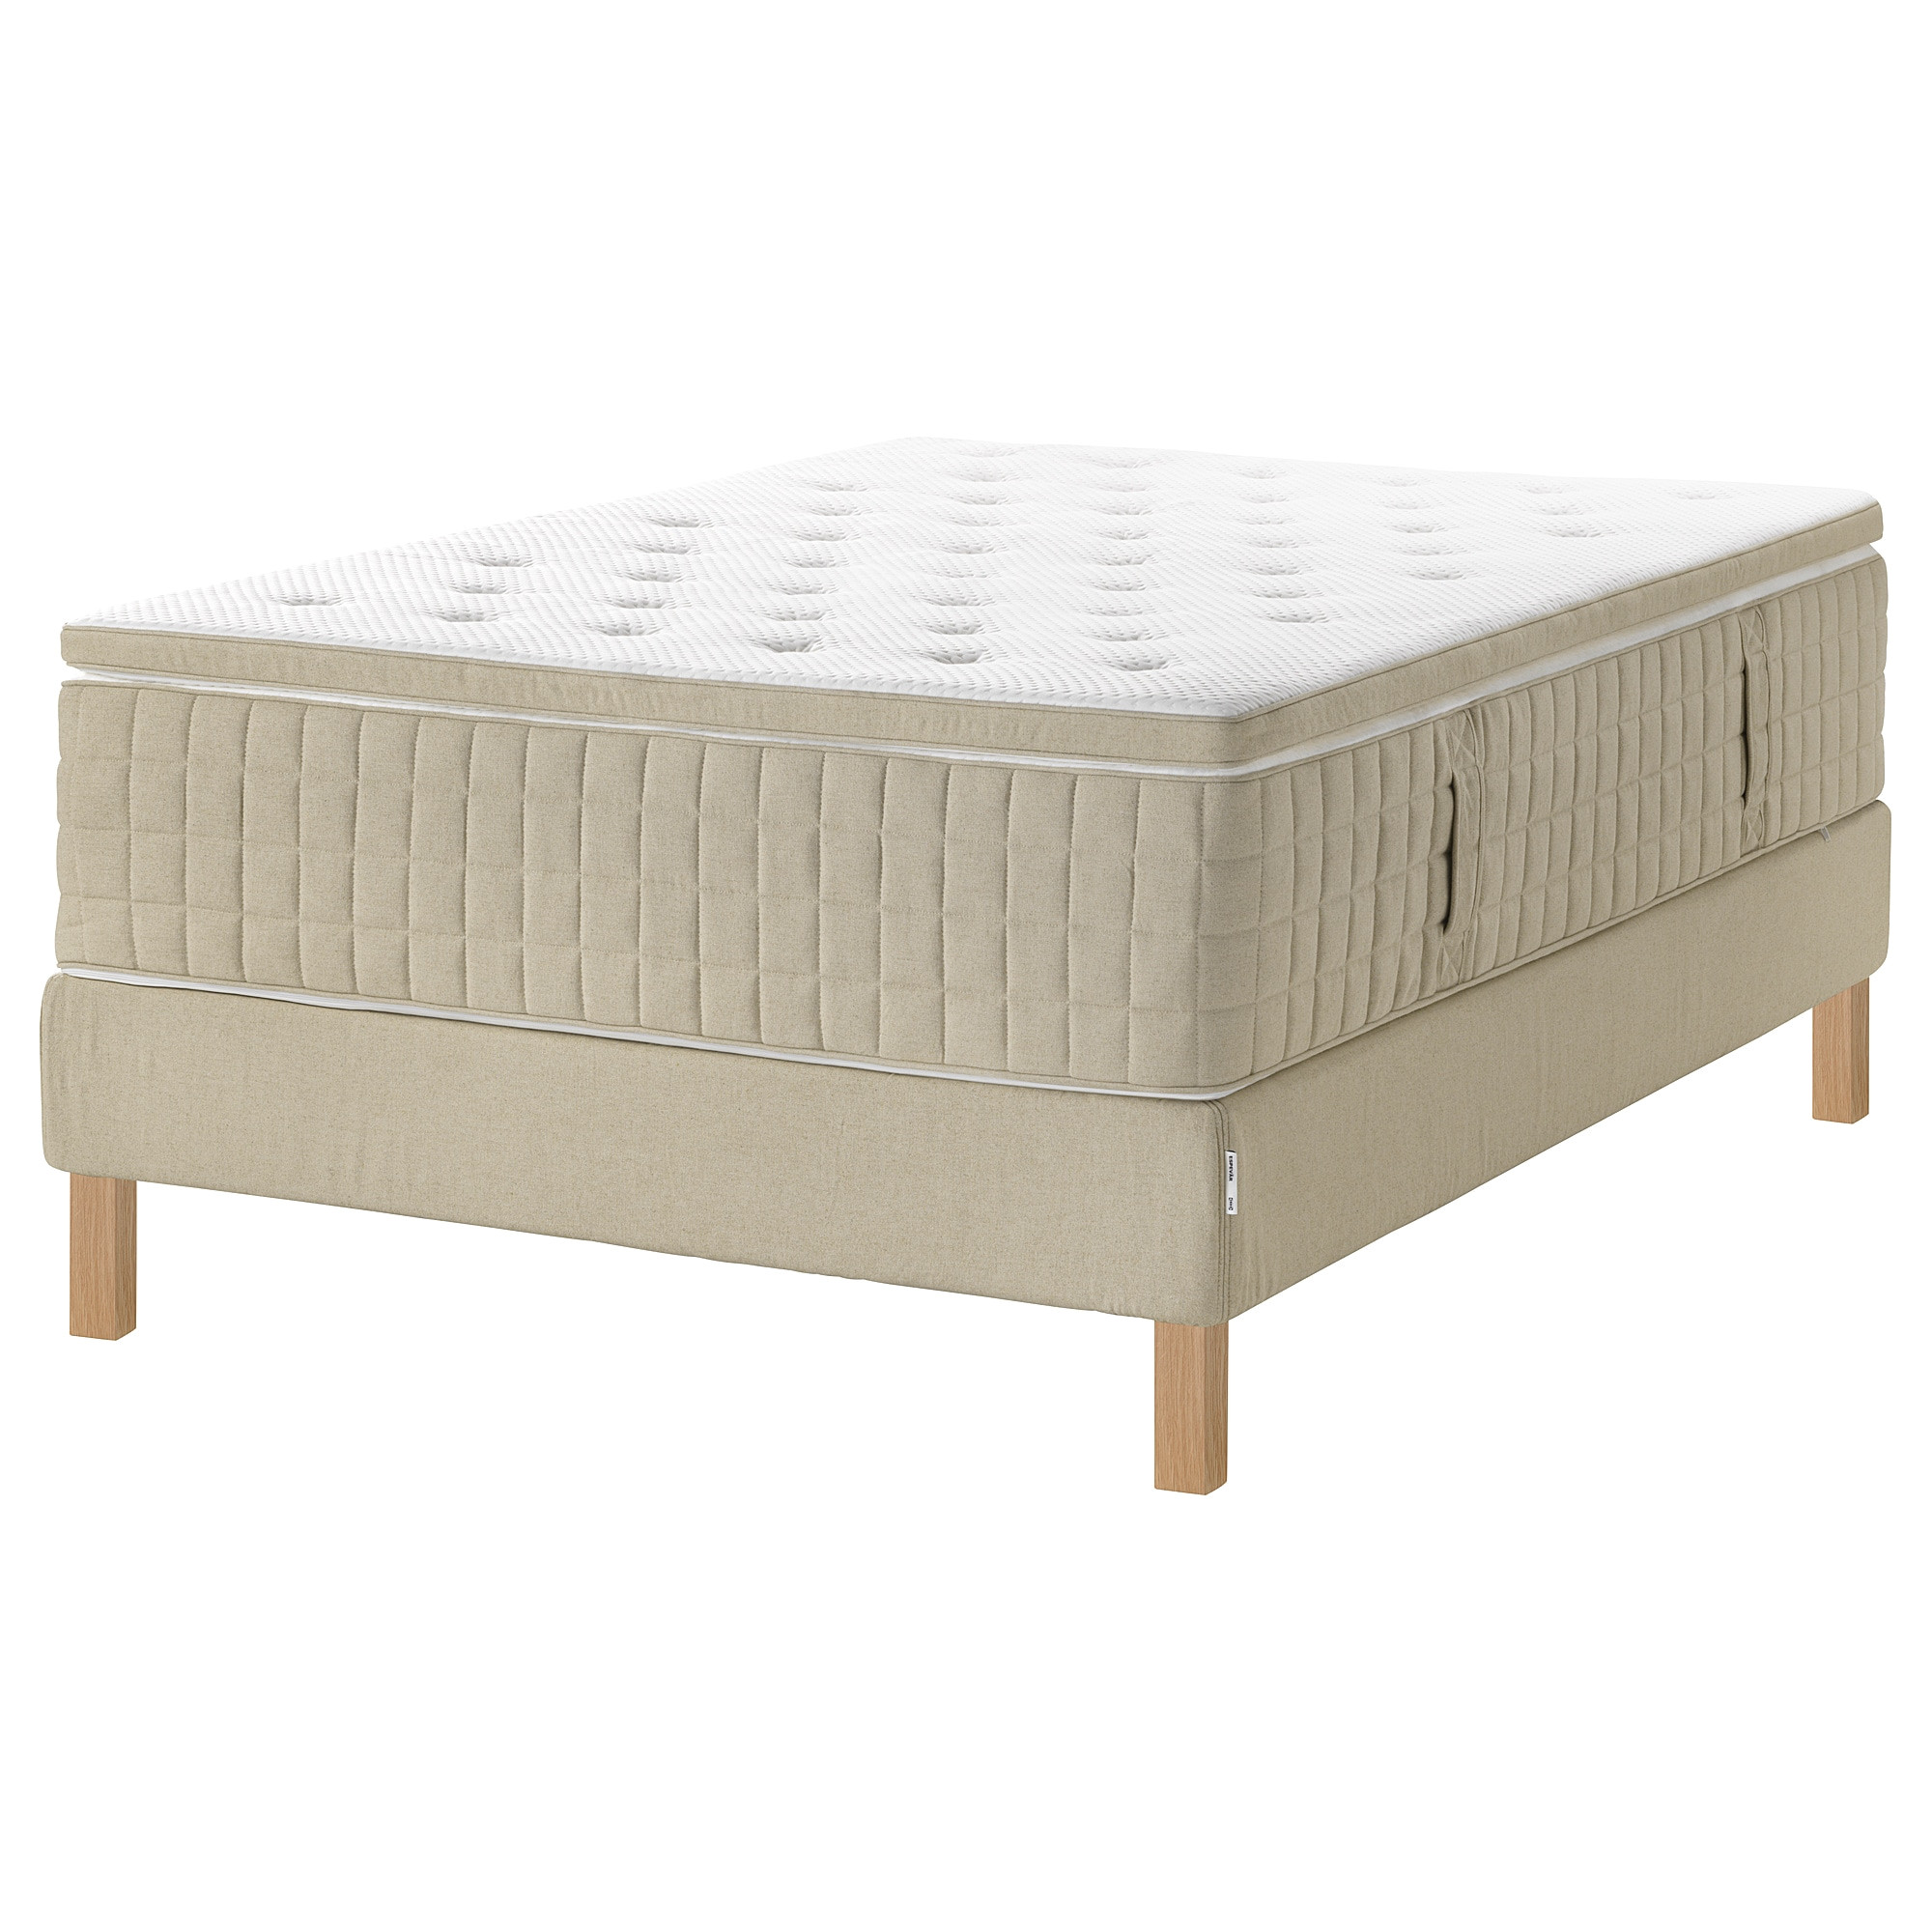 ikea espeva r divan bed easy to get in and out of bed because the mattress base